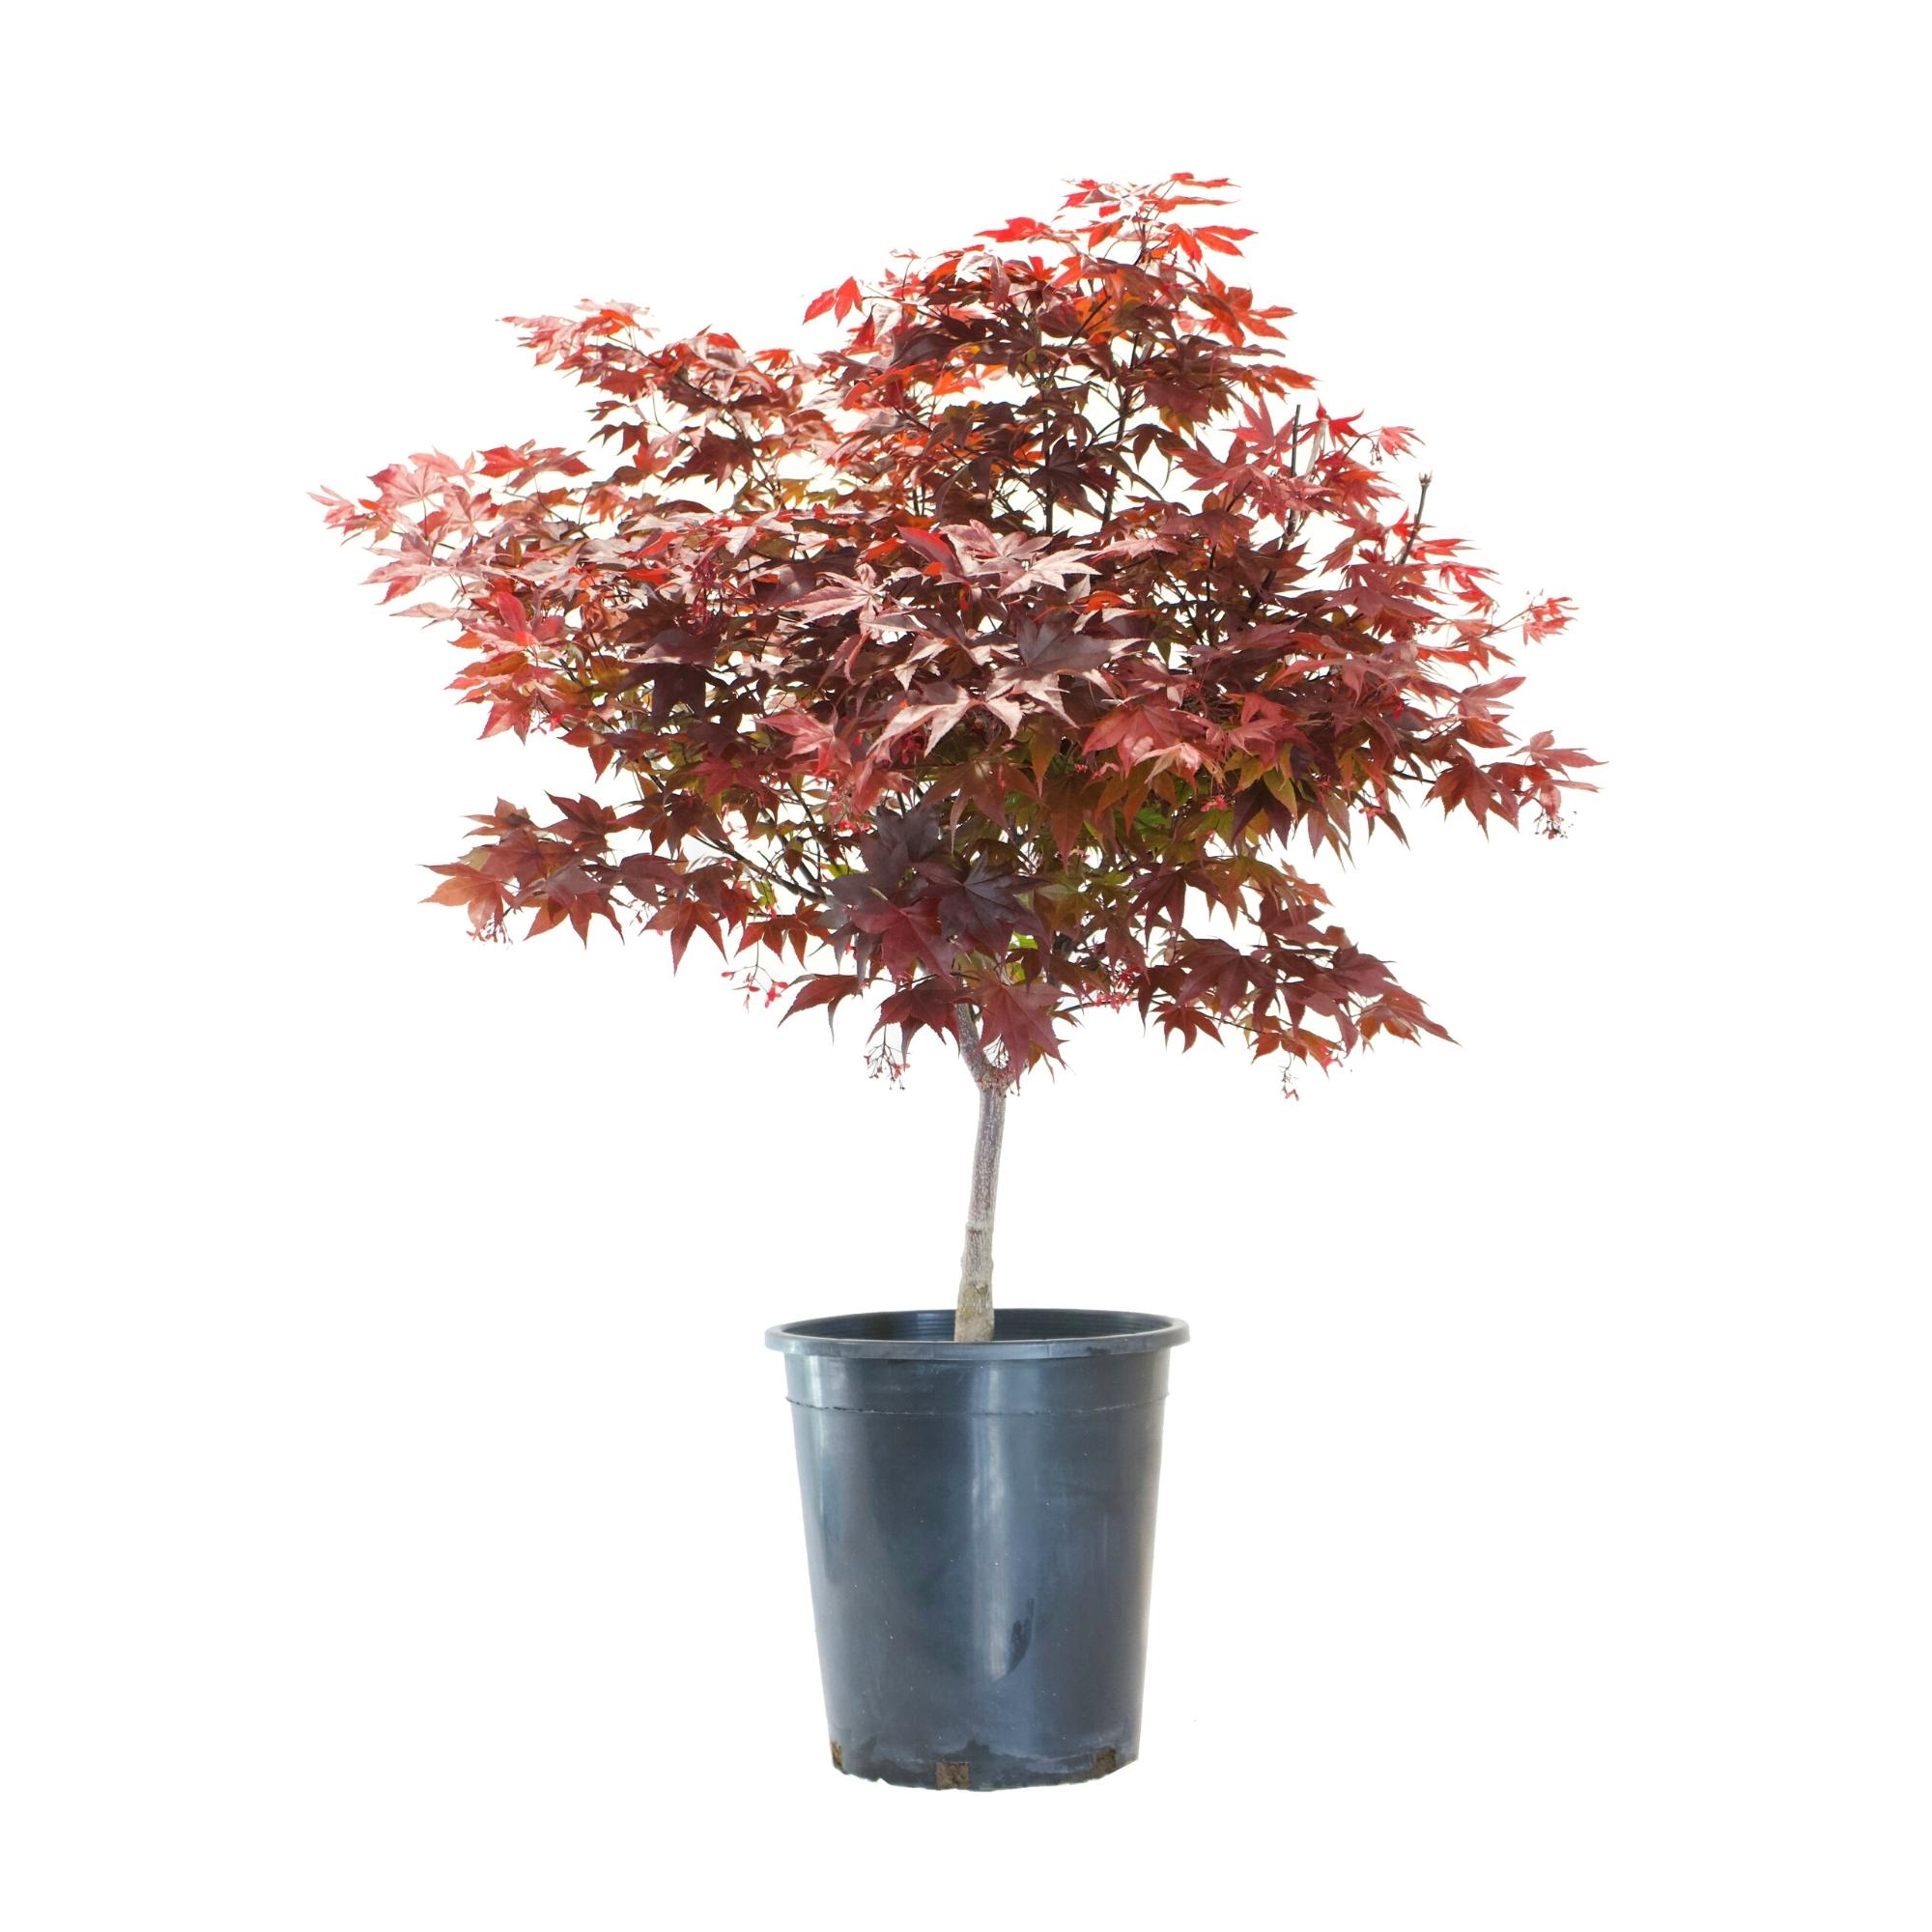 Japanese Maple tree with reddish colored leaves in a black nursery pot.